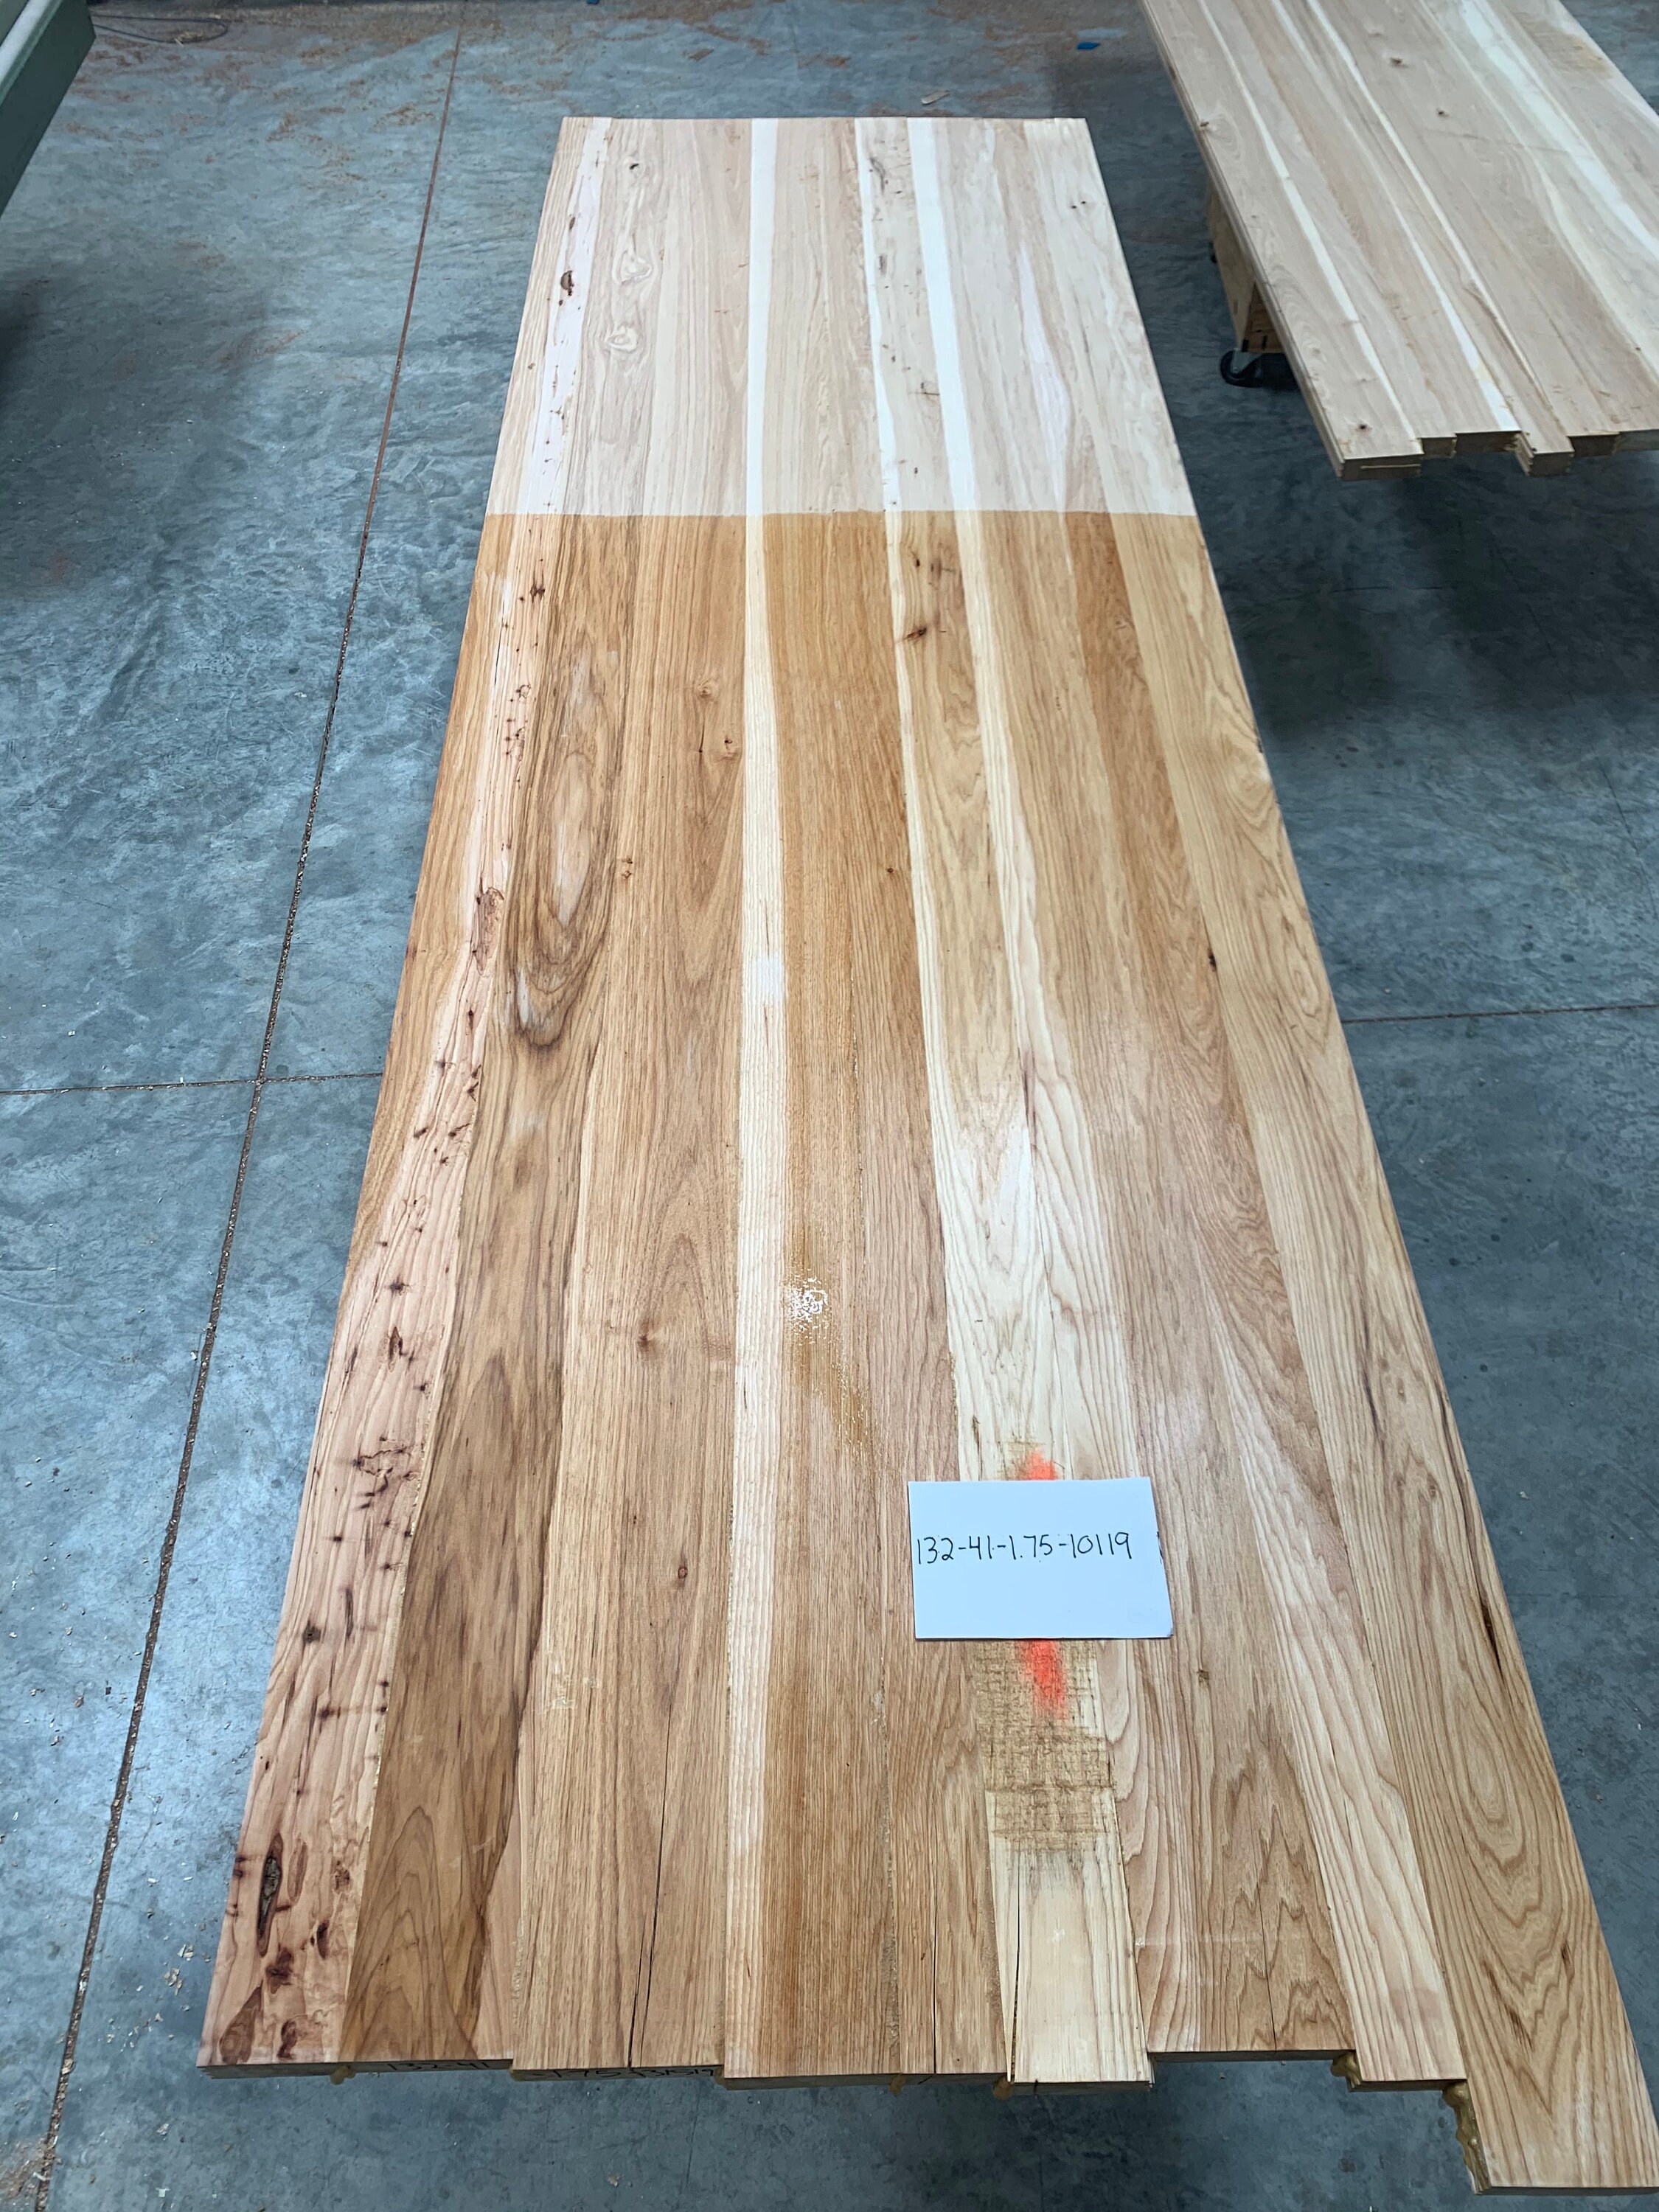 Wood Countertop Butcher Block, How To Finish A Wood Slab Countertop